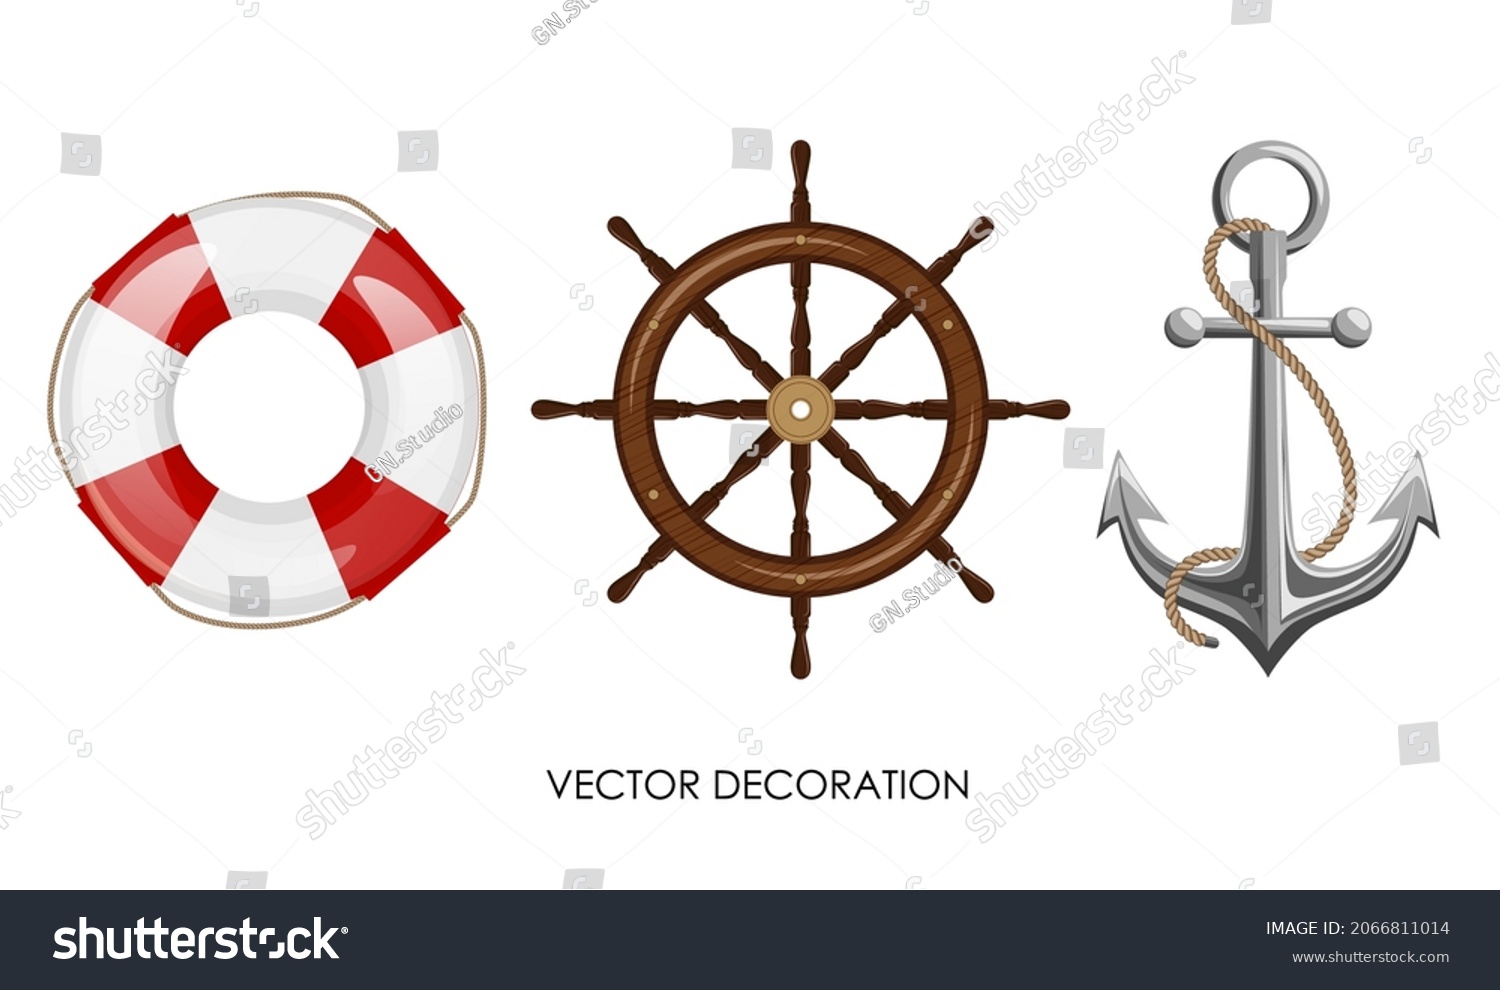 SVG of Set of lifebuoy, wooden steering wheel, anchor with rope on white background. Isolated vintage ship objects. Elements of sea boat equipment . Marine theme decoration. Vector illustration svg